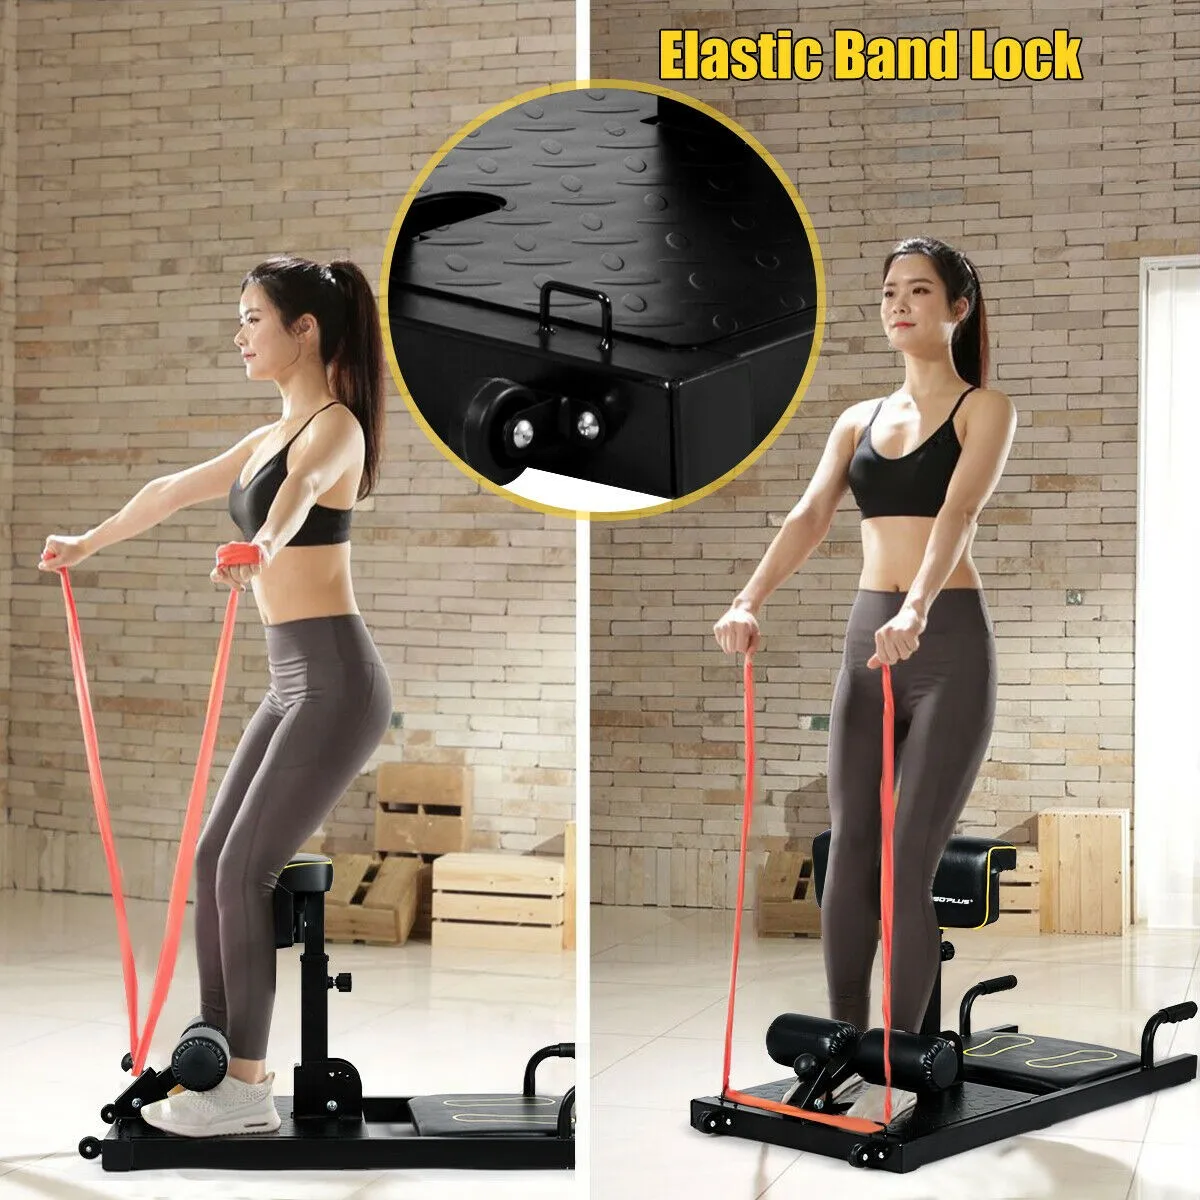 GRT Fitness H2d7dcb5eecaa434c99c8a93dc888fa0dj 8-in-1 Home Gym Multifunction Squat Fitness Machine workout equipments exercise equipment 